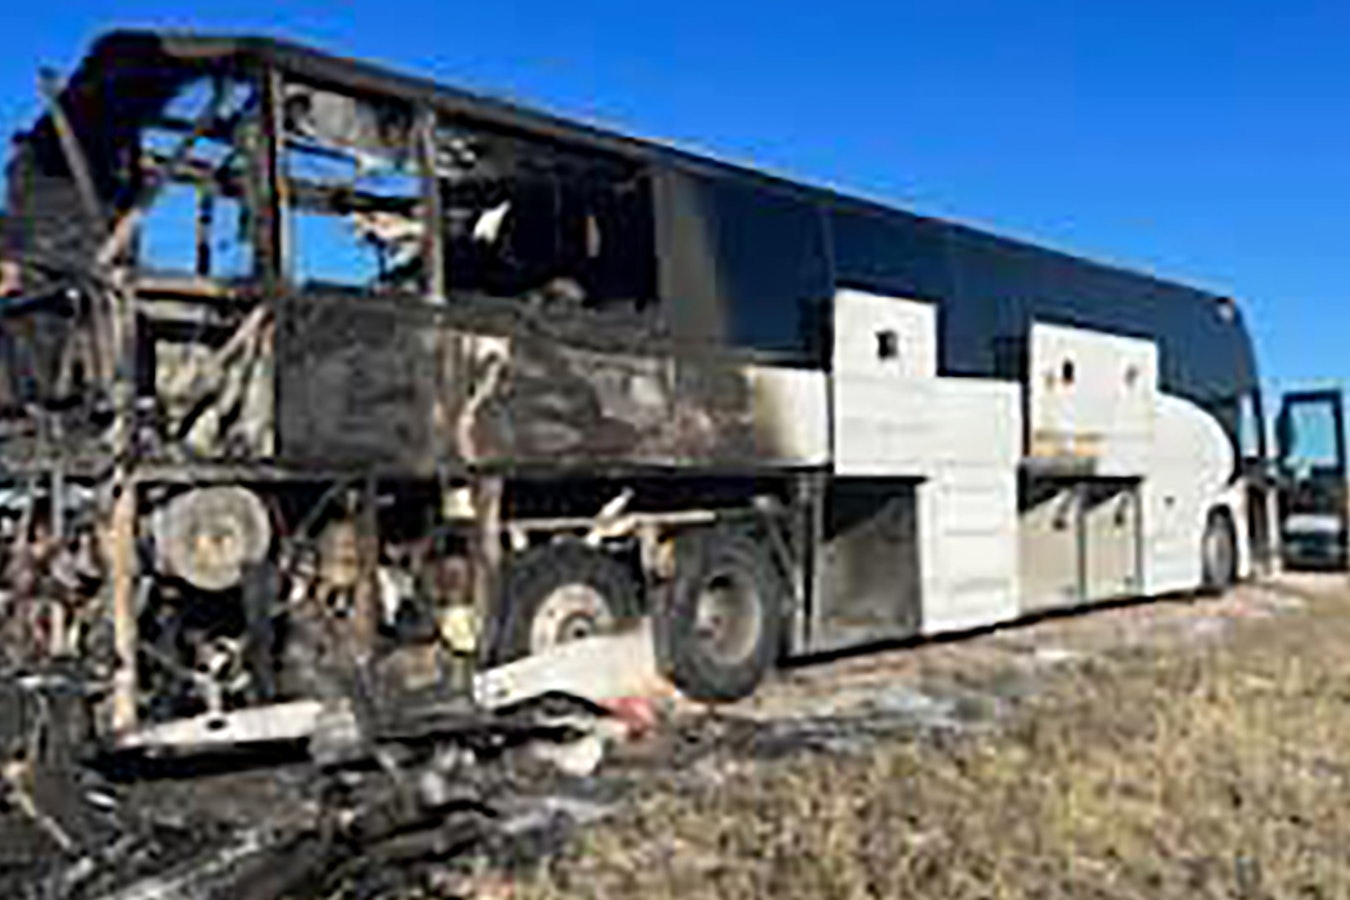 A fire that burned up a bus carrying the South Dakota School of Mines football team's defense appears to have started in the engine.